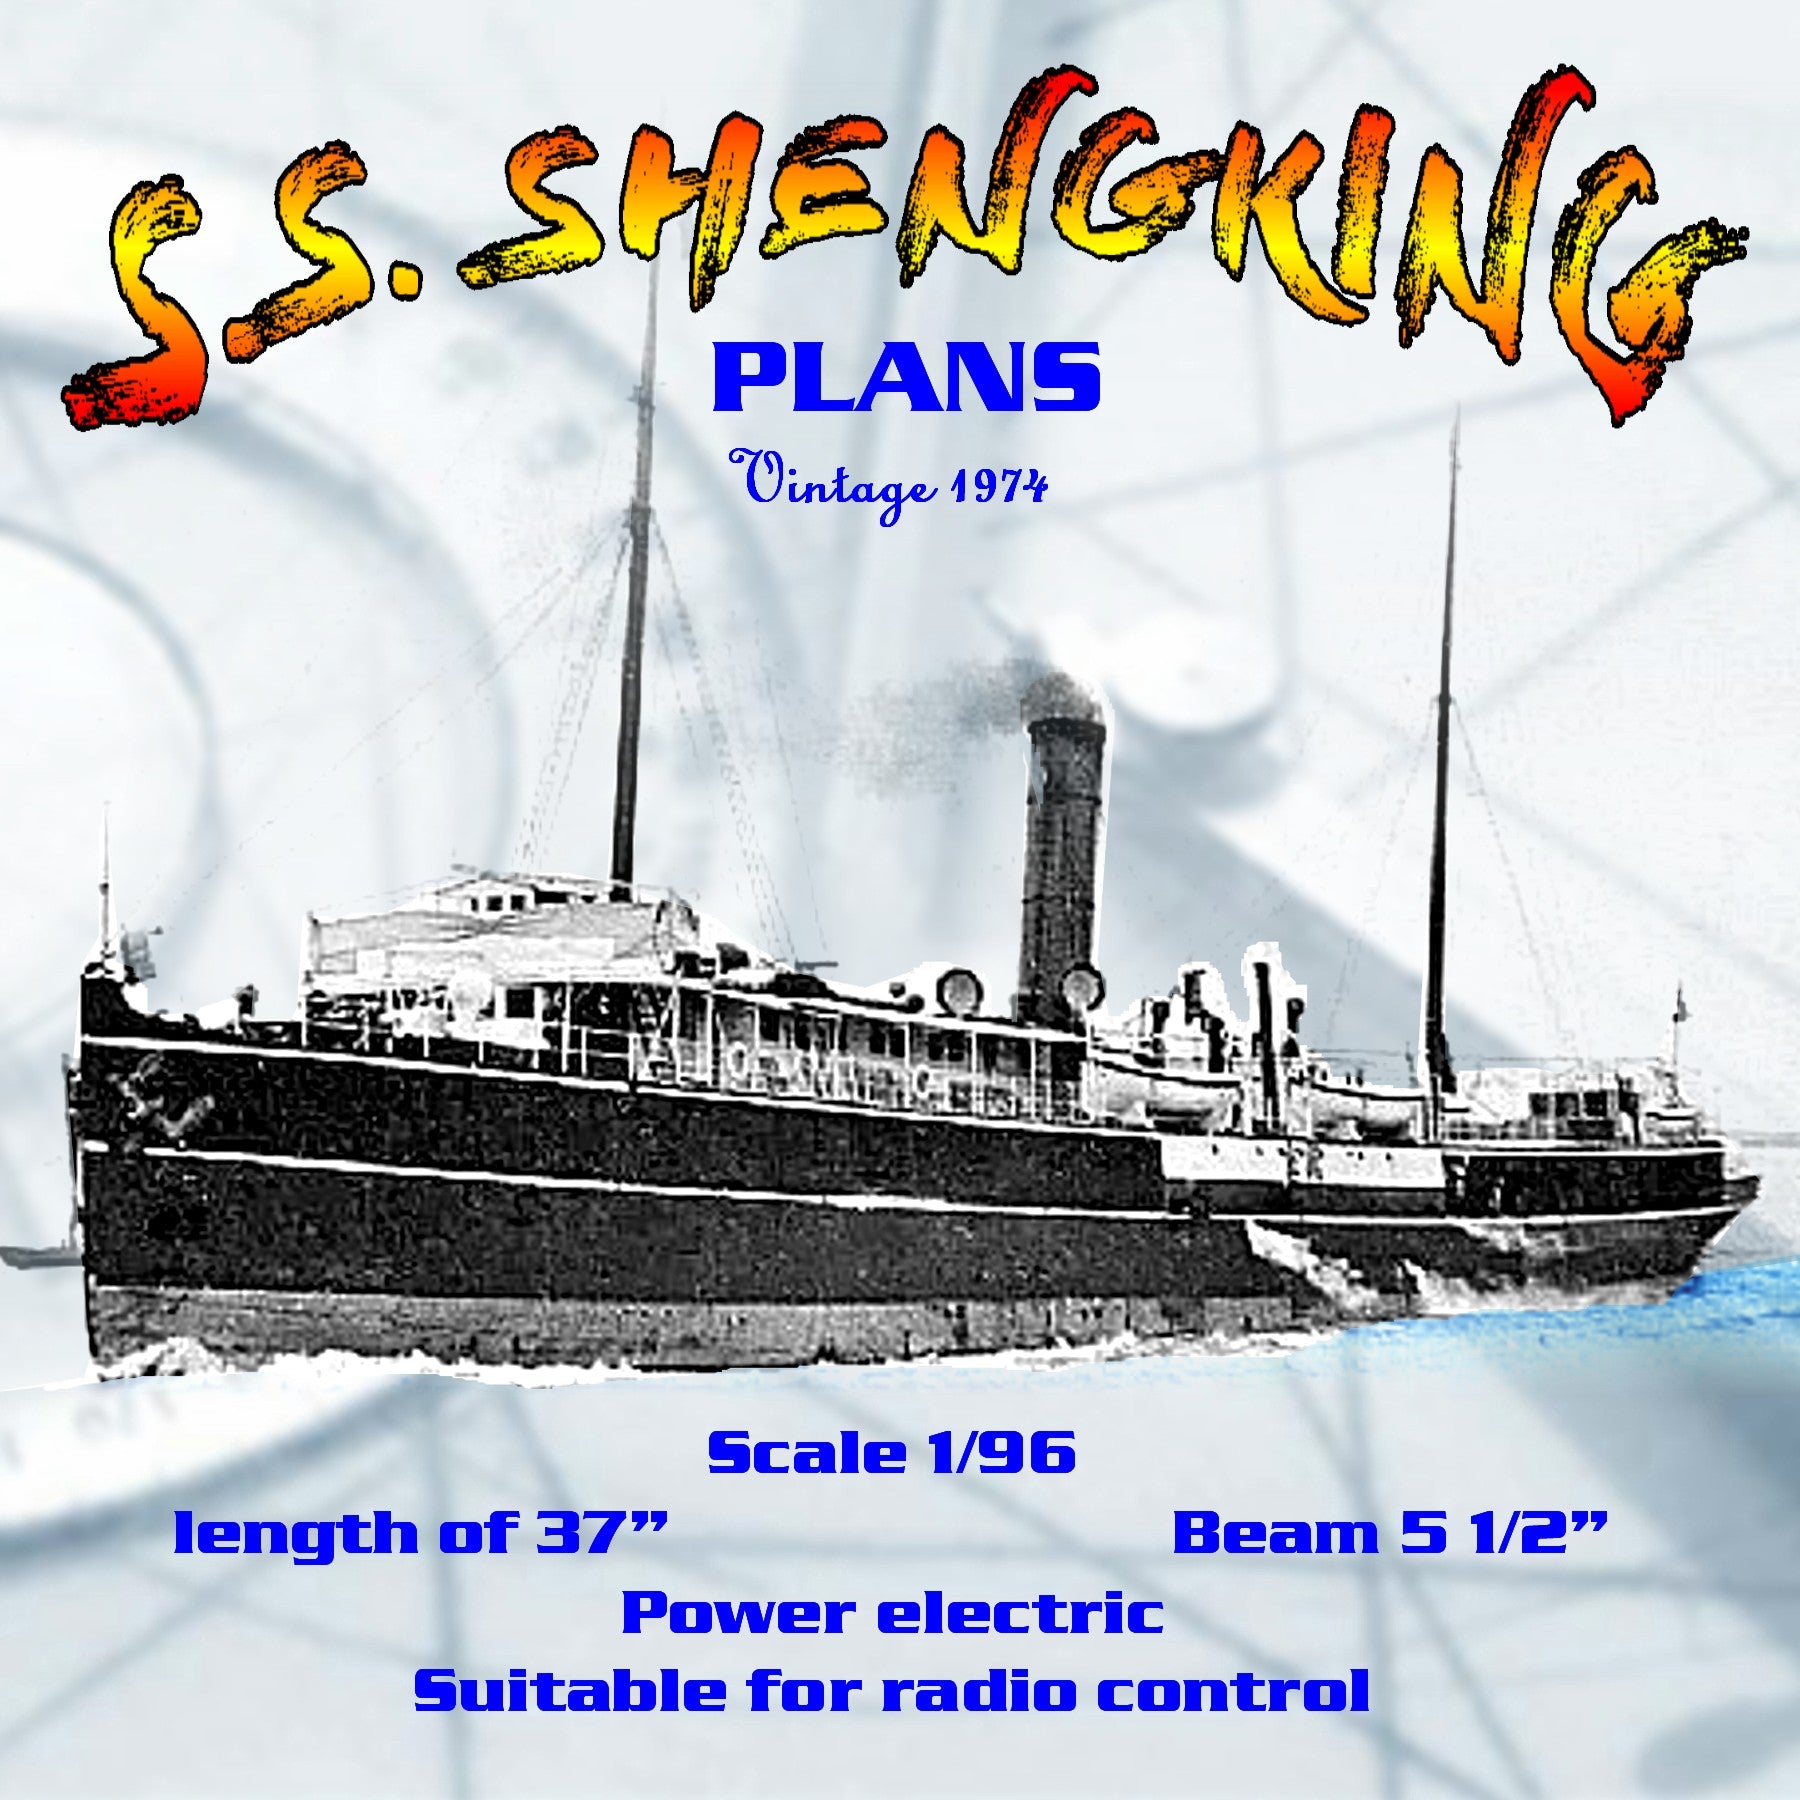 full size printed plan scale 1/96 small passenger-cargo ship "s.s. shengking" suitable for radio control